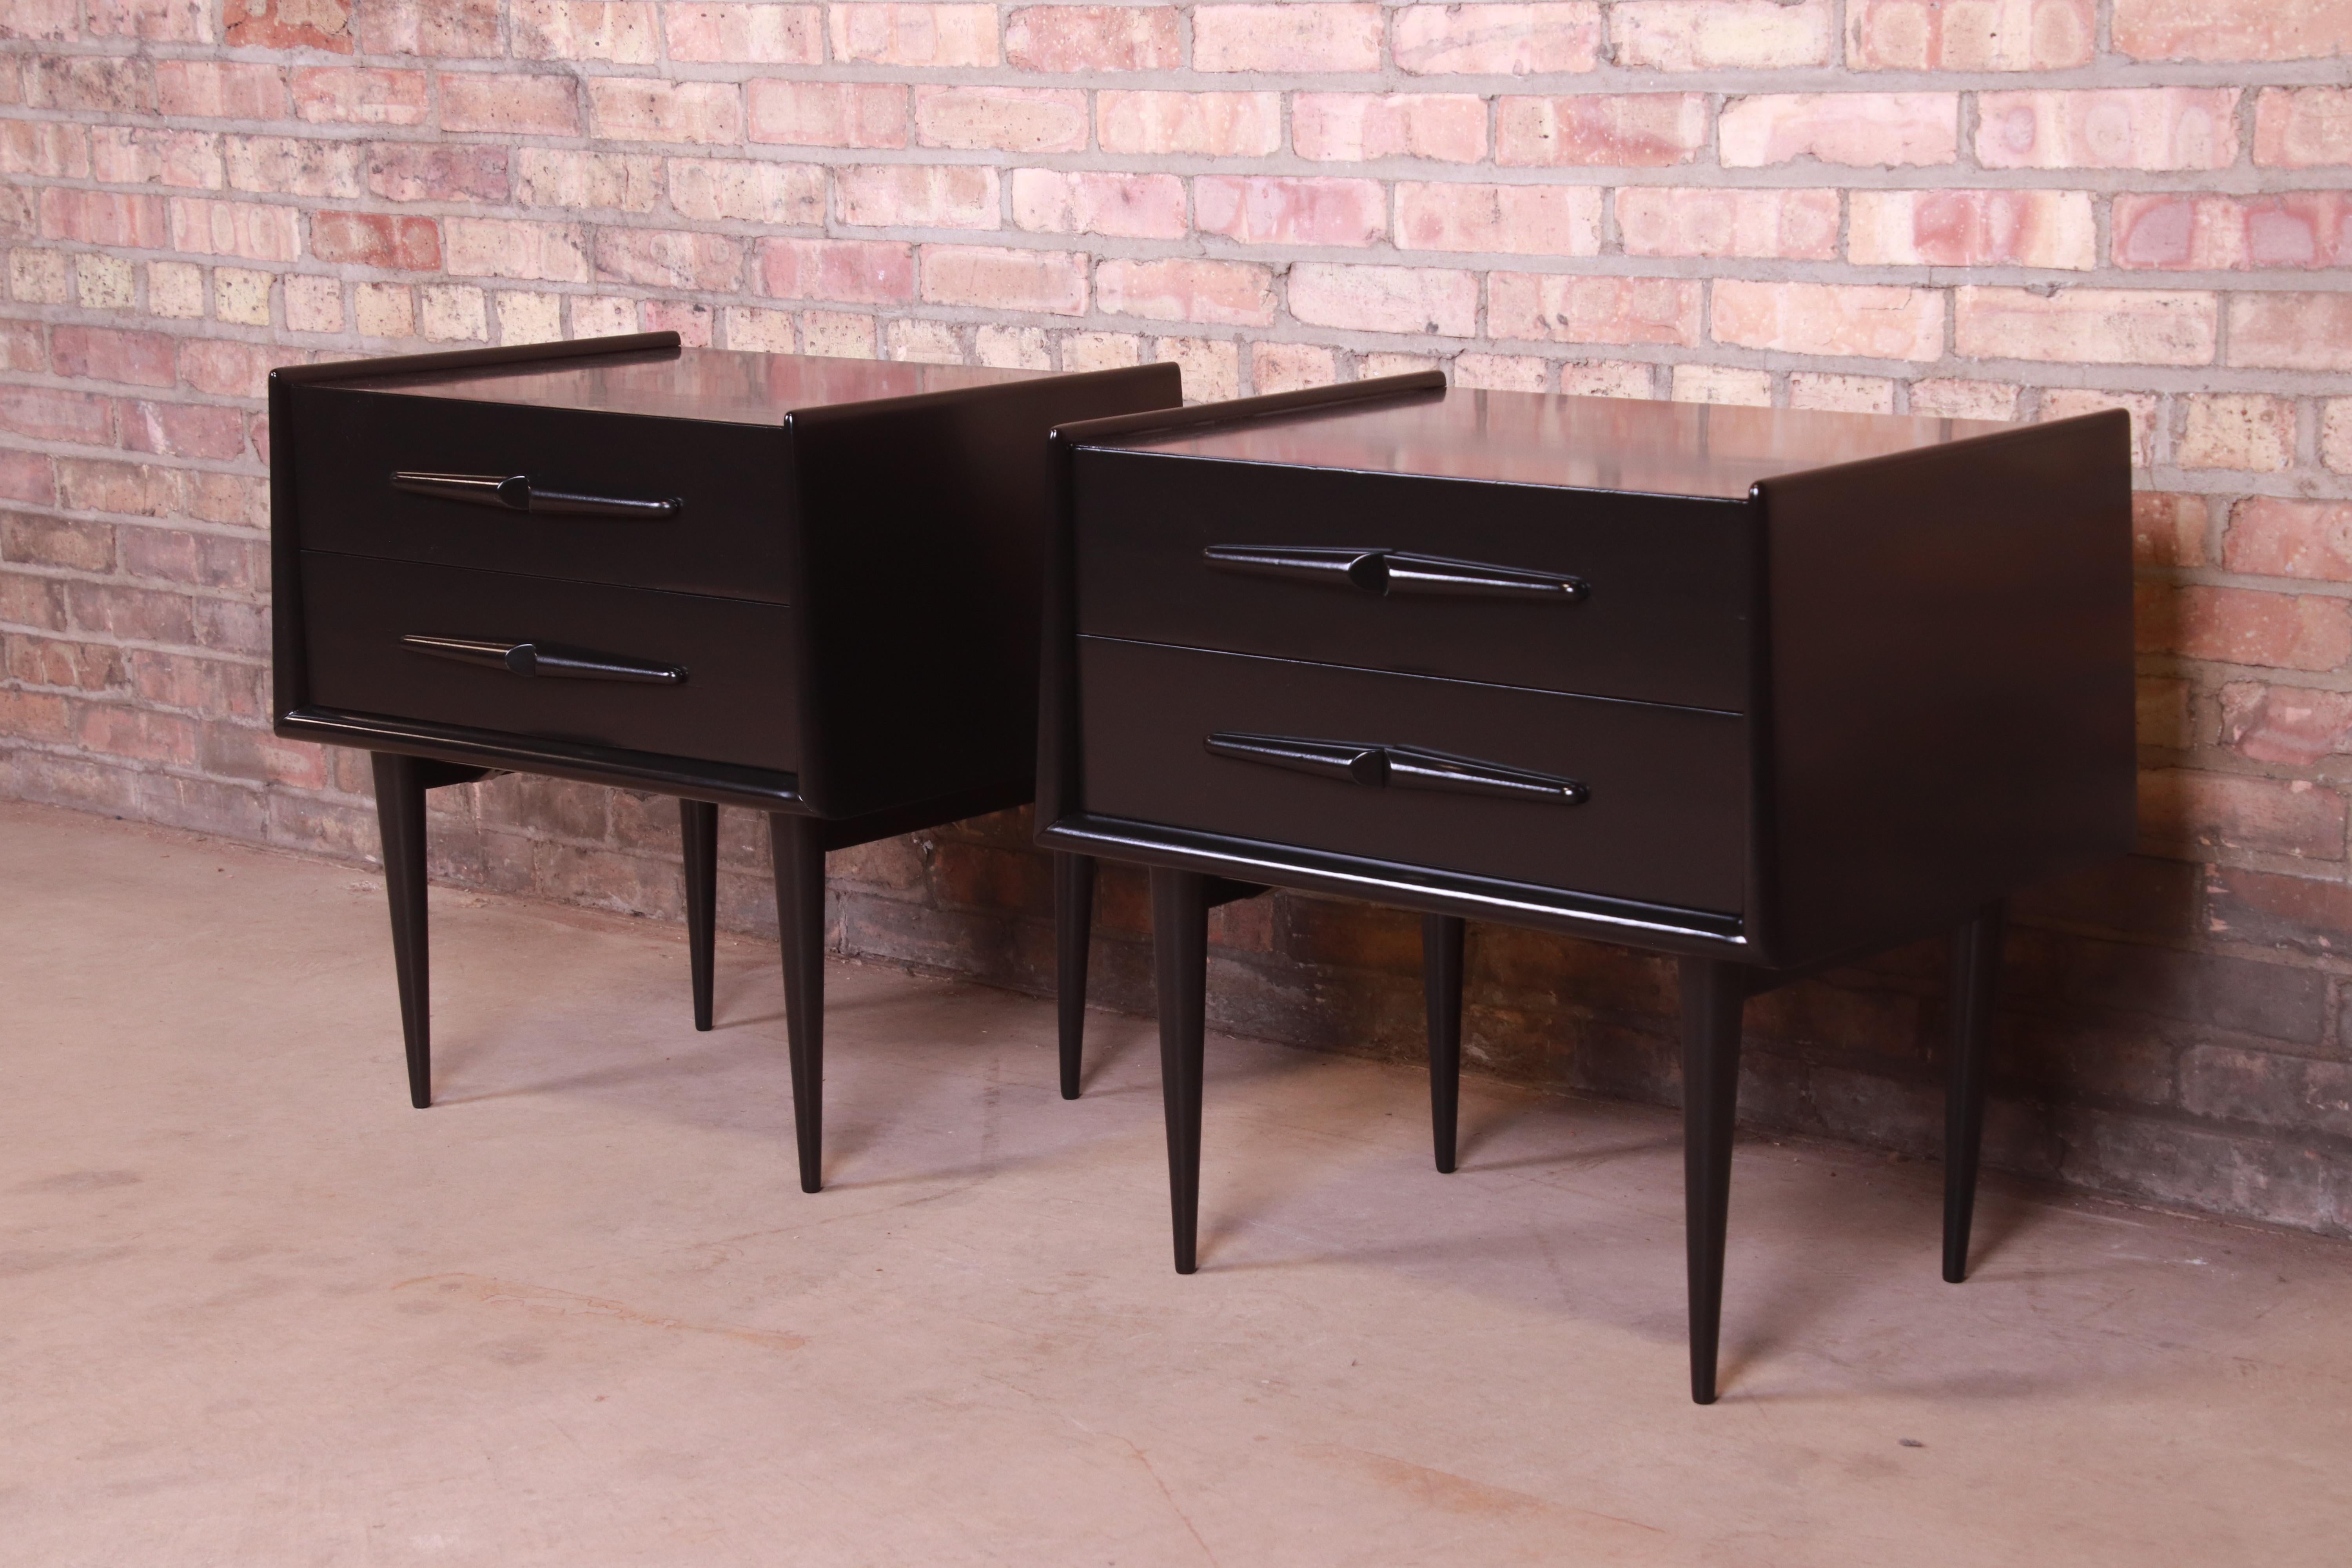 An exceptional pair of midcentury Swedish Modern black lacquered birch nightstands

Designed by Edmond Spence

Sweden, 1950s

Measures: 24.5